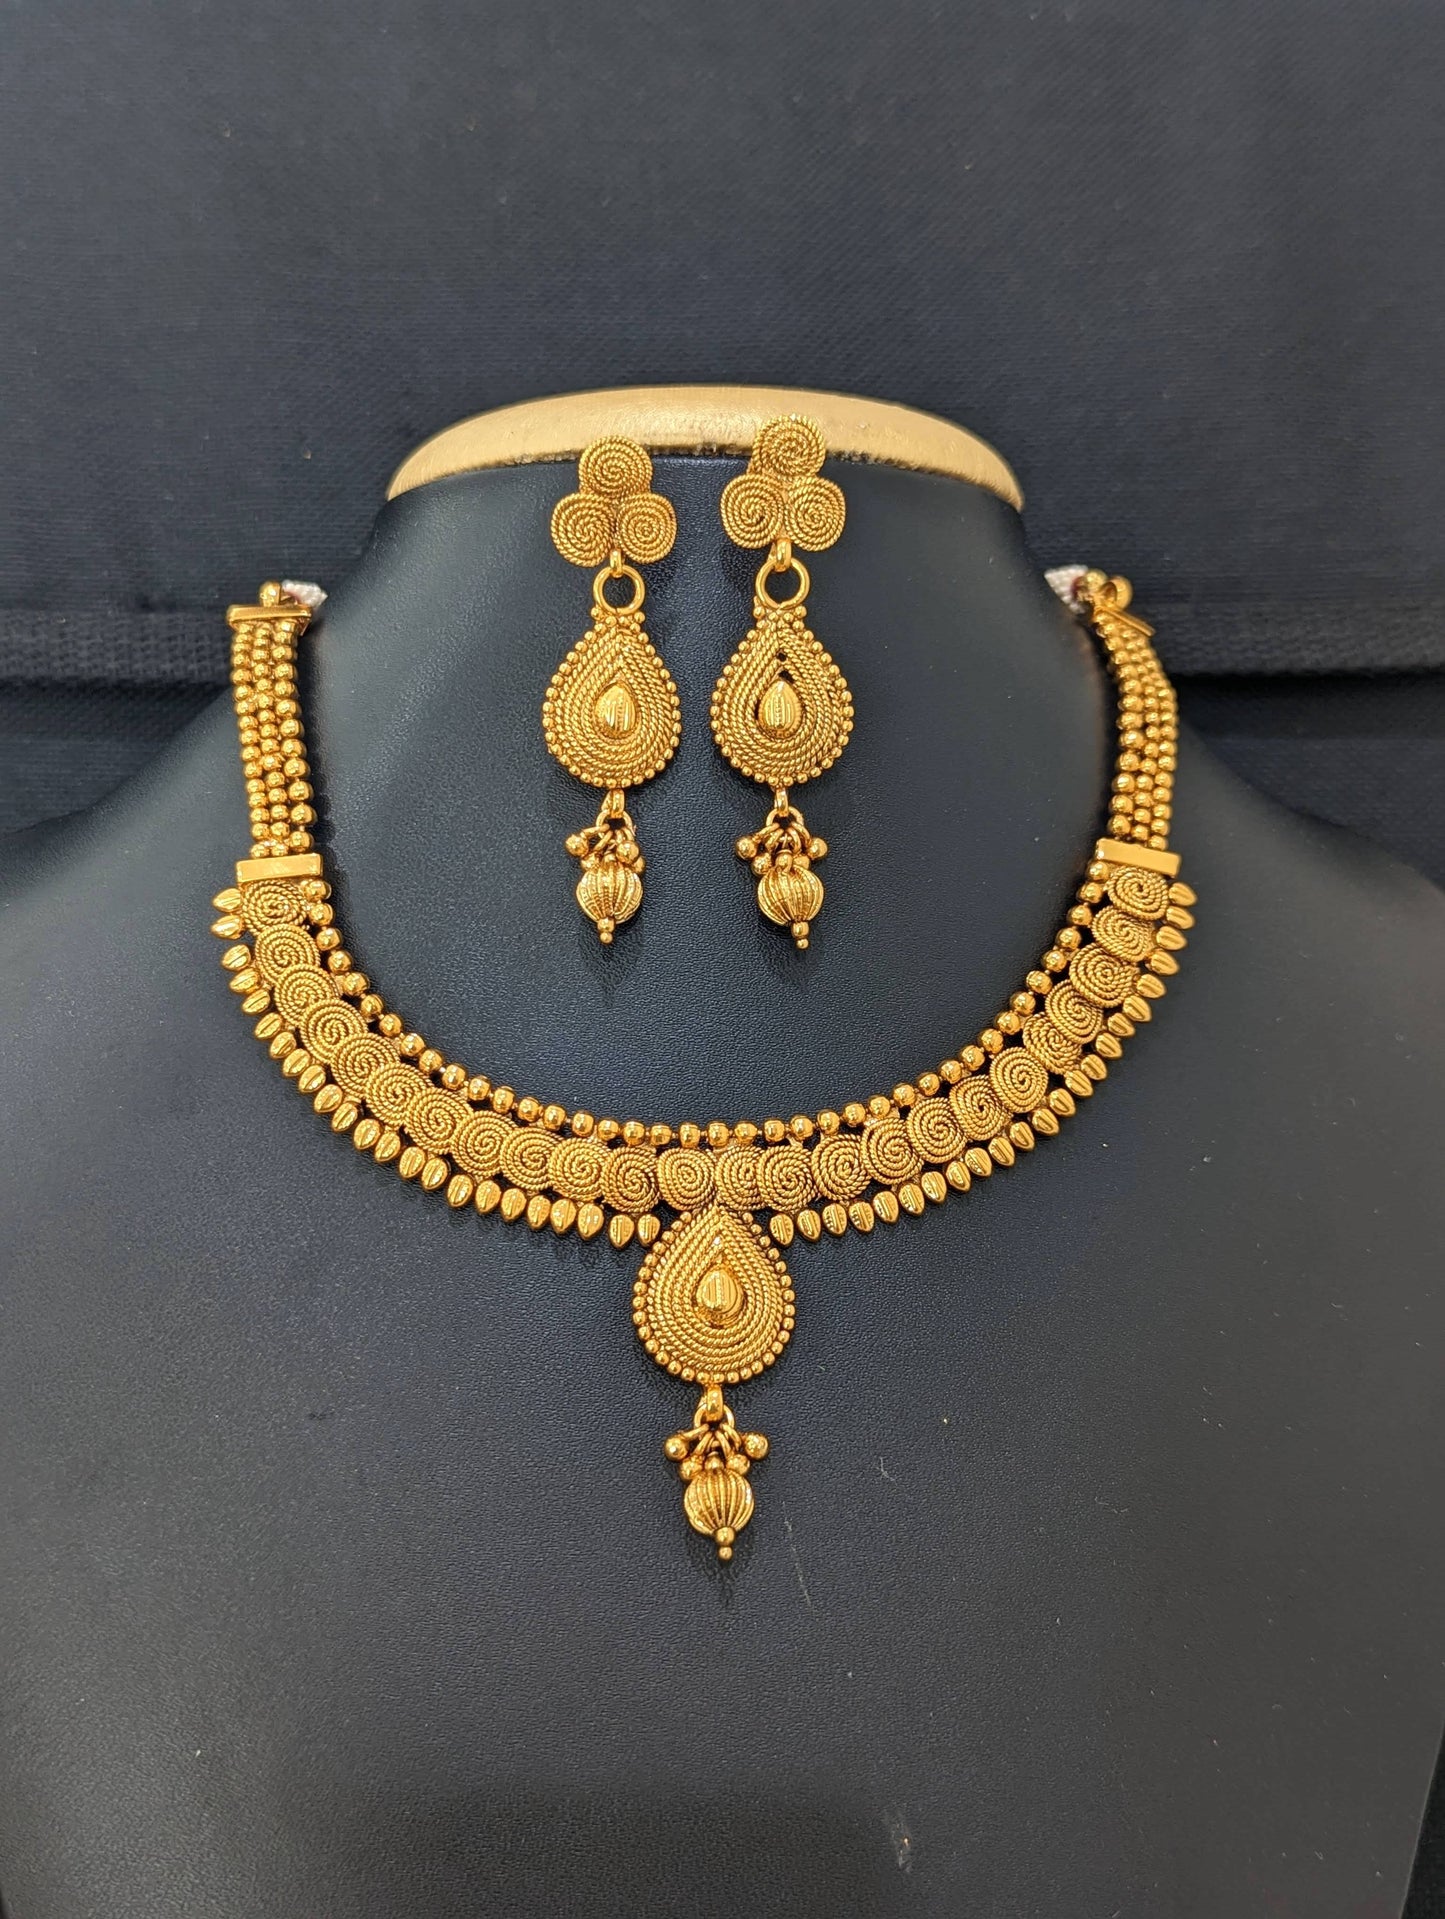 Real gold look alike Choker Necklace and Earrings set - Design 2